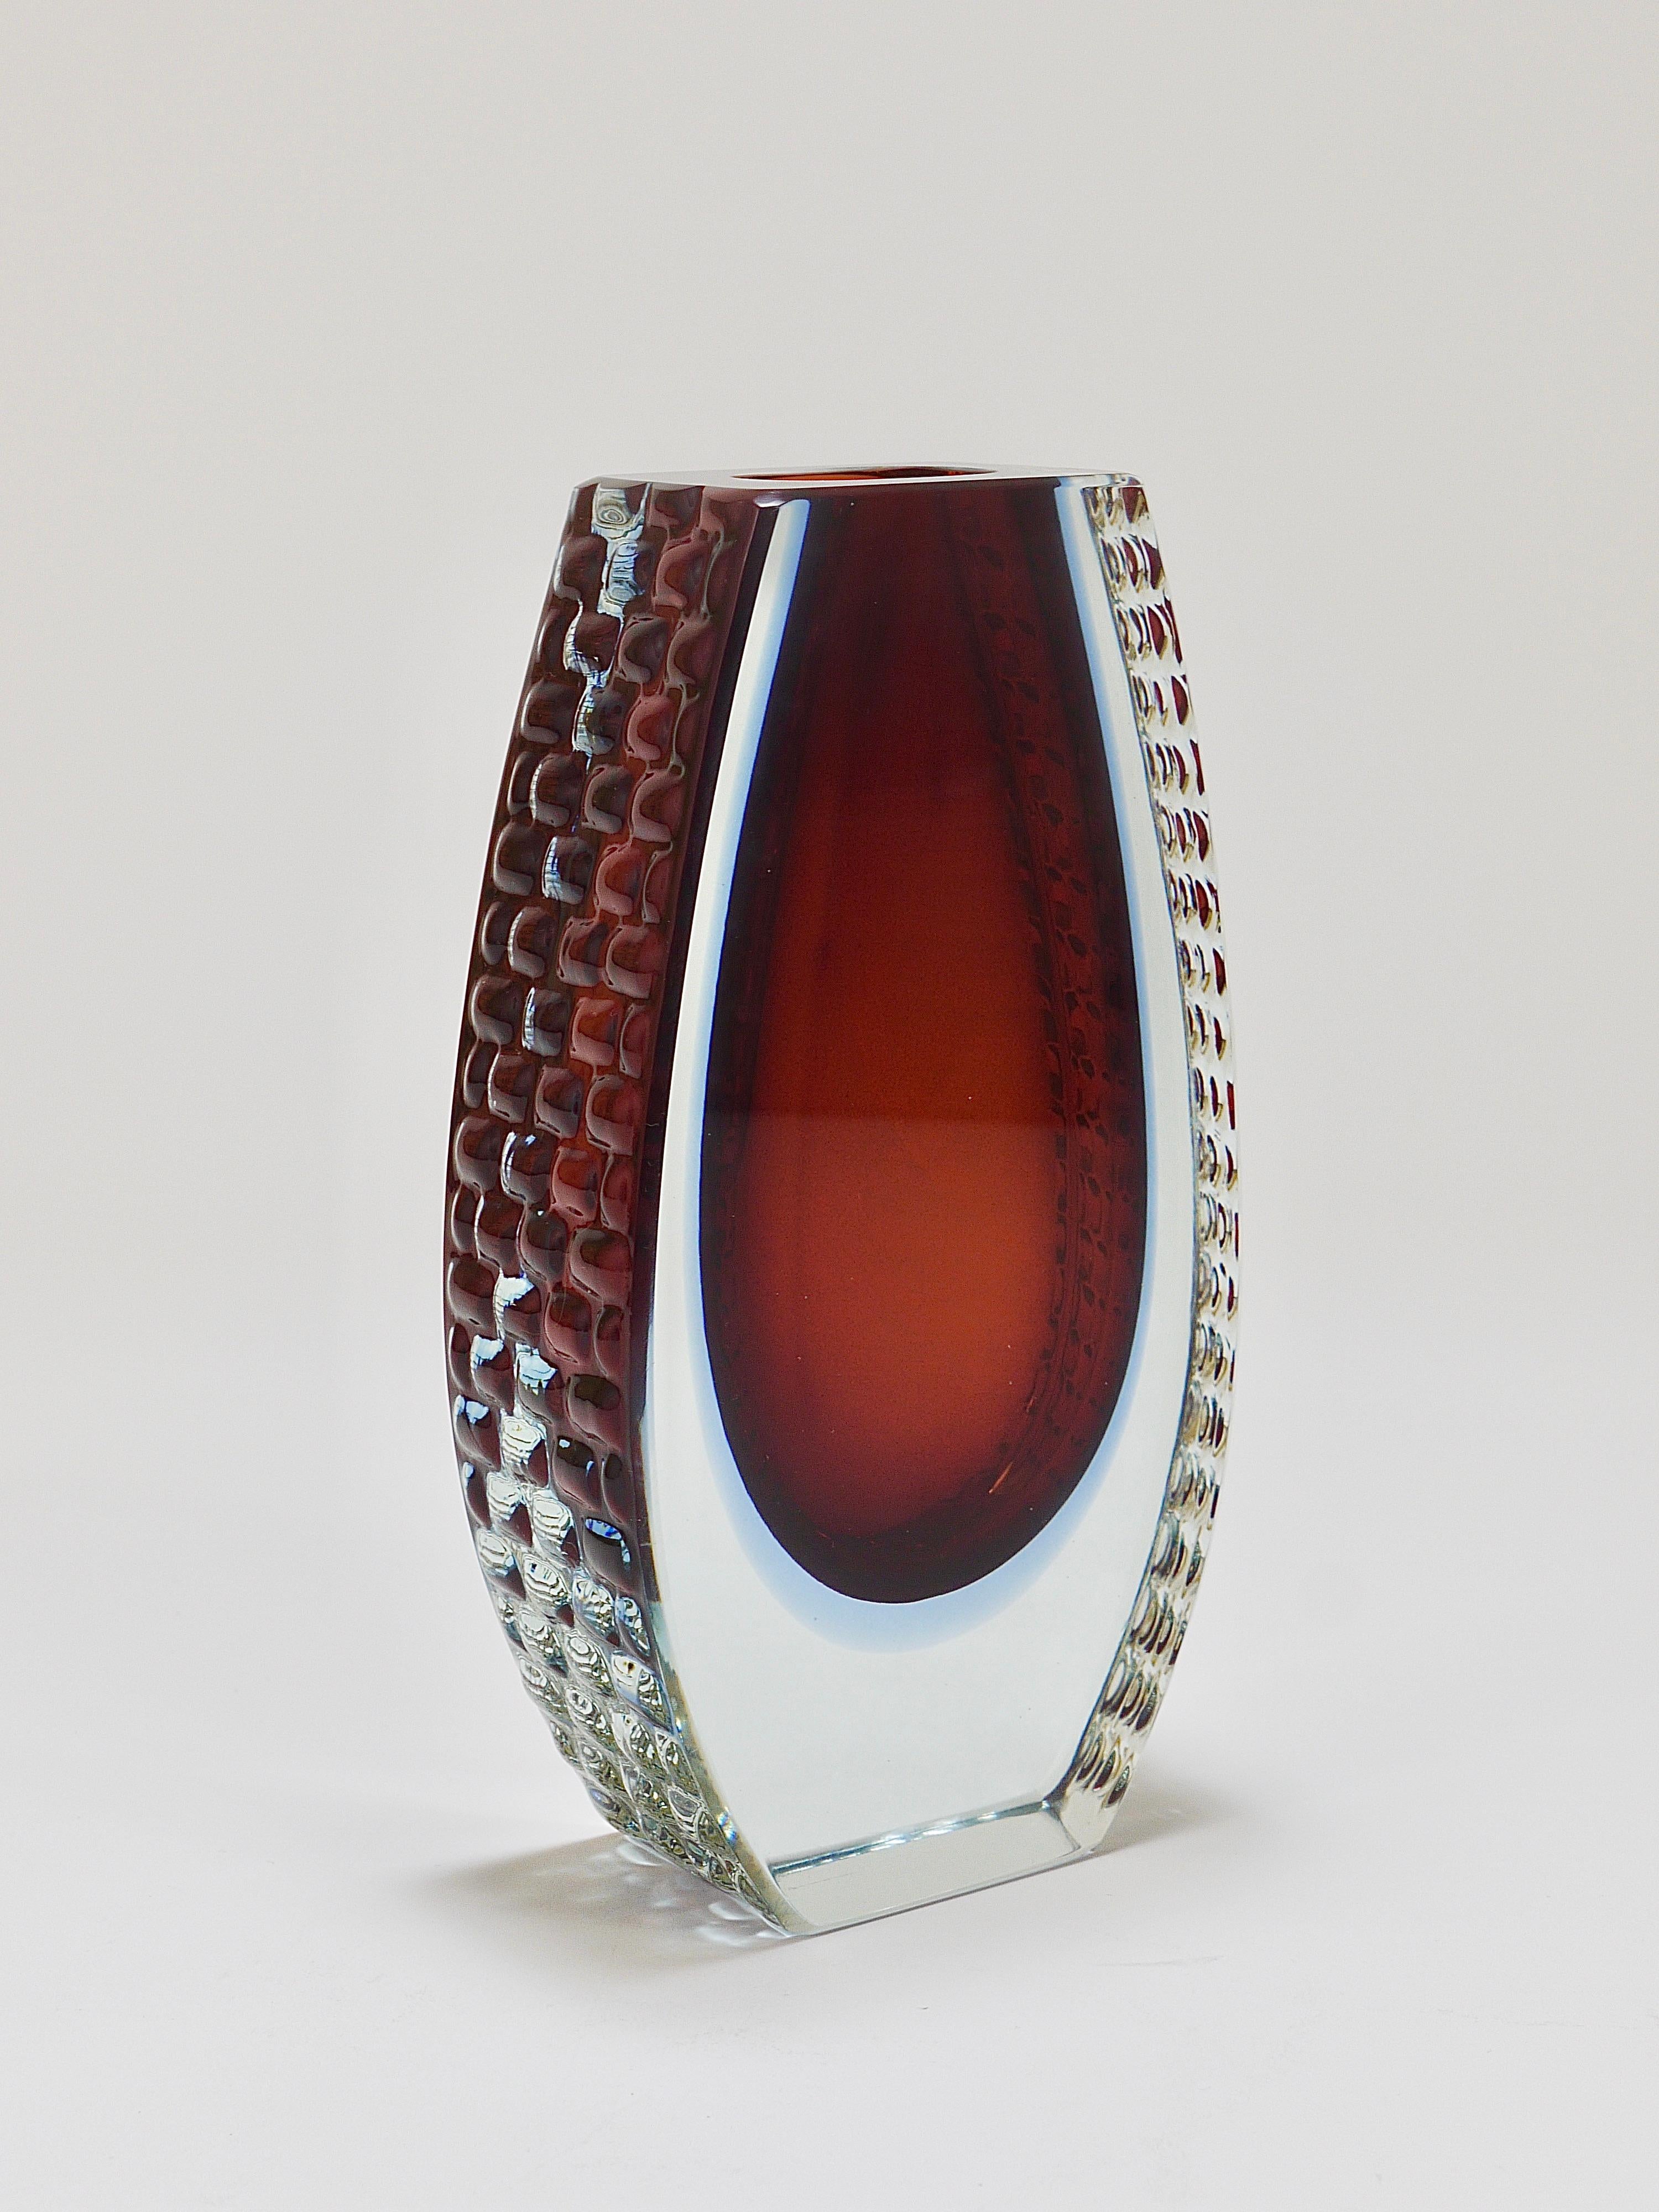 Large Mandruzzato Sommerso Murano Textured Facetted Art Glass Vase, Italy, 1970s For Sale 1